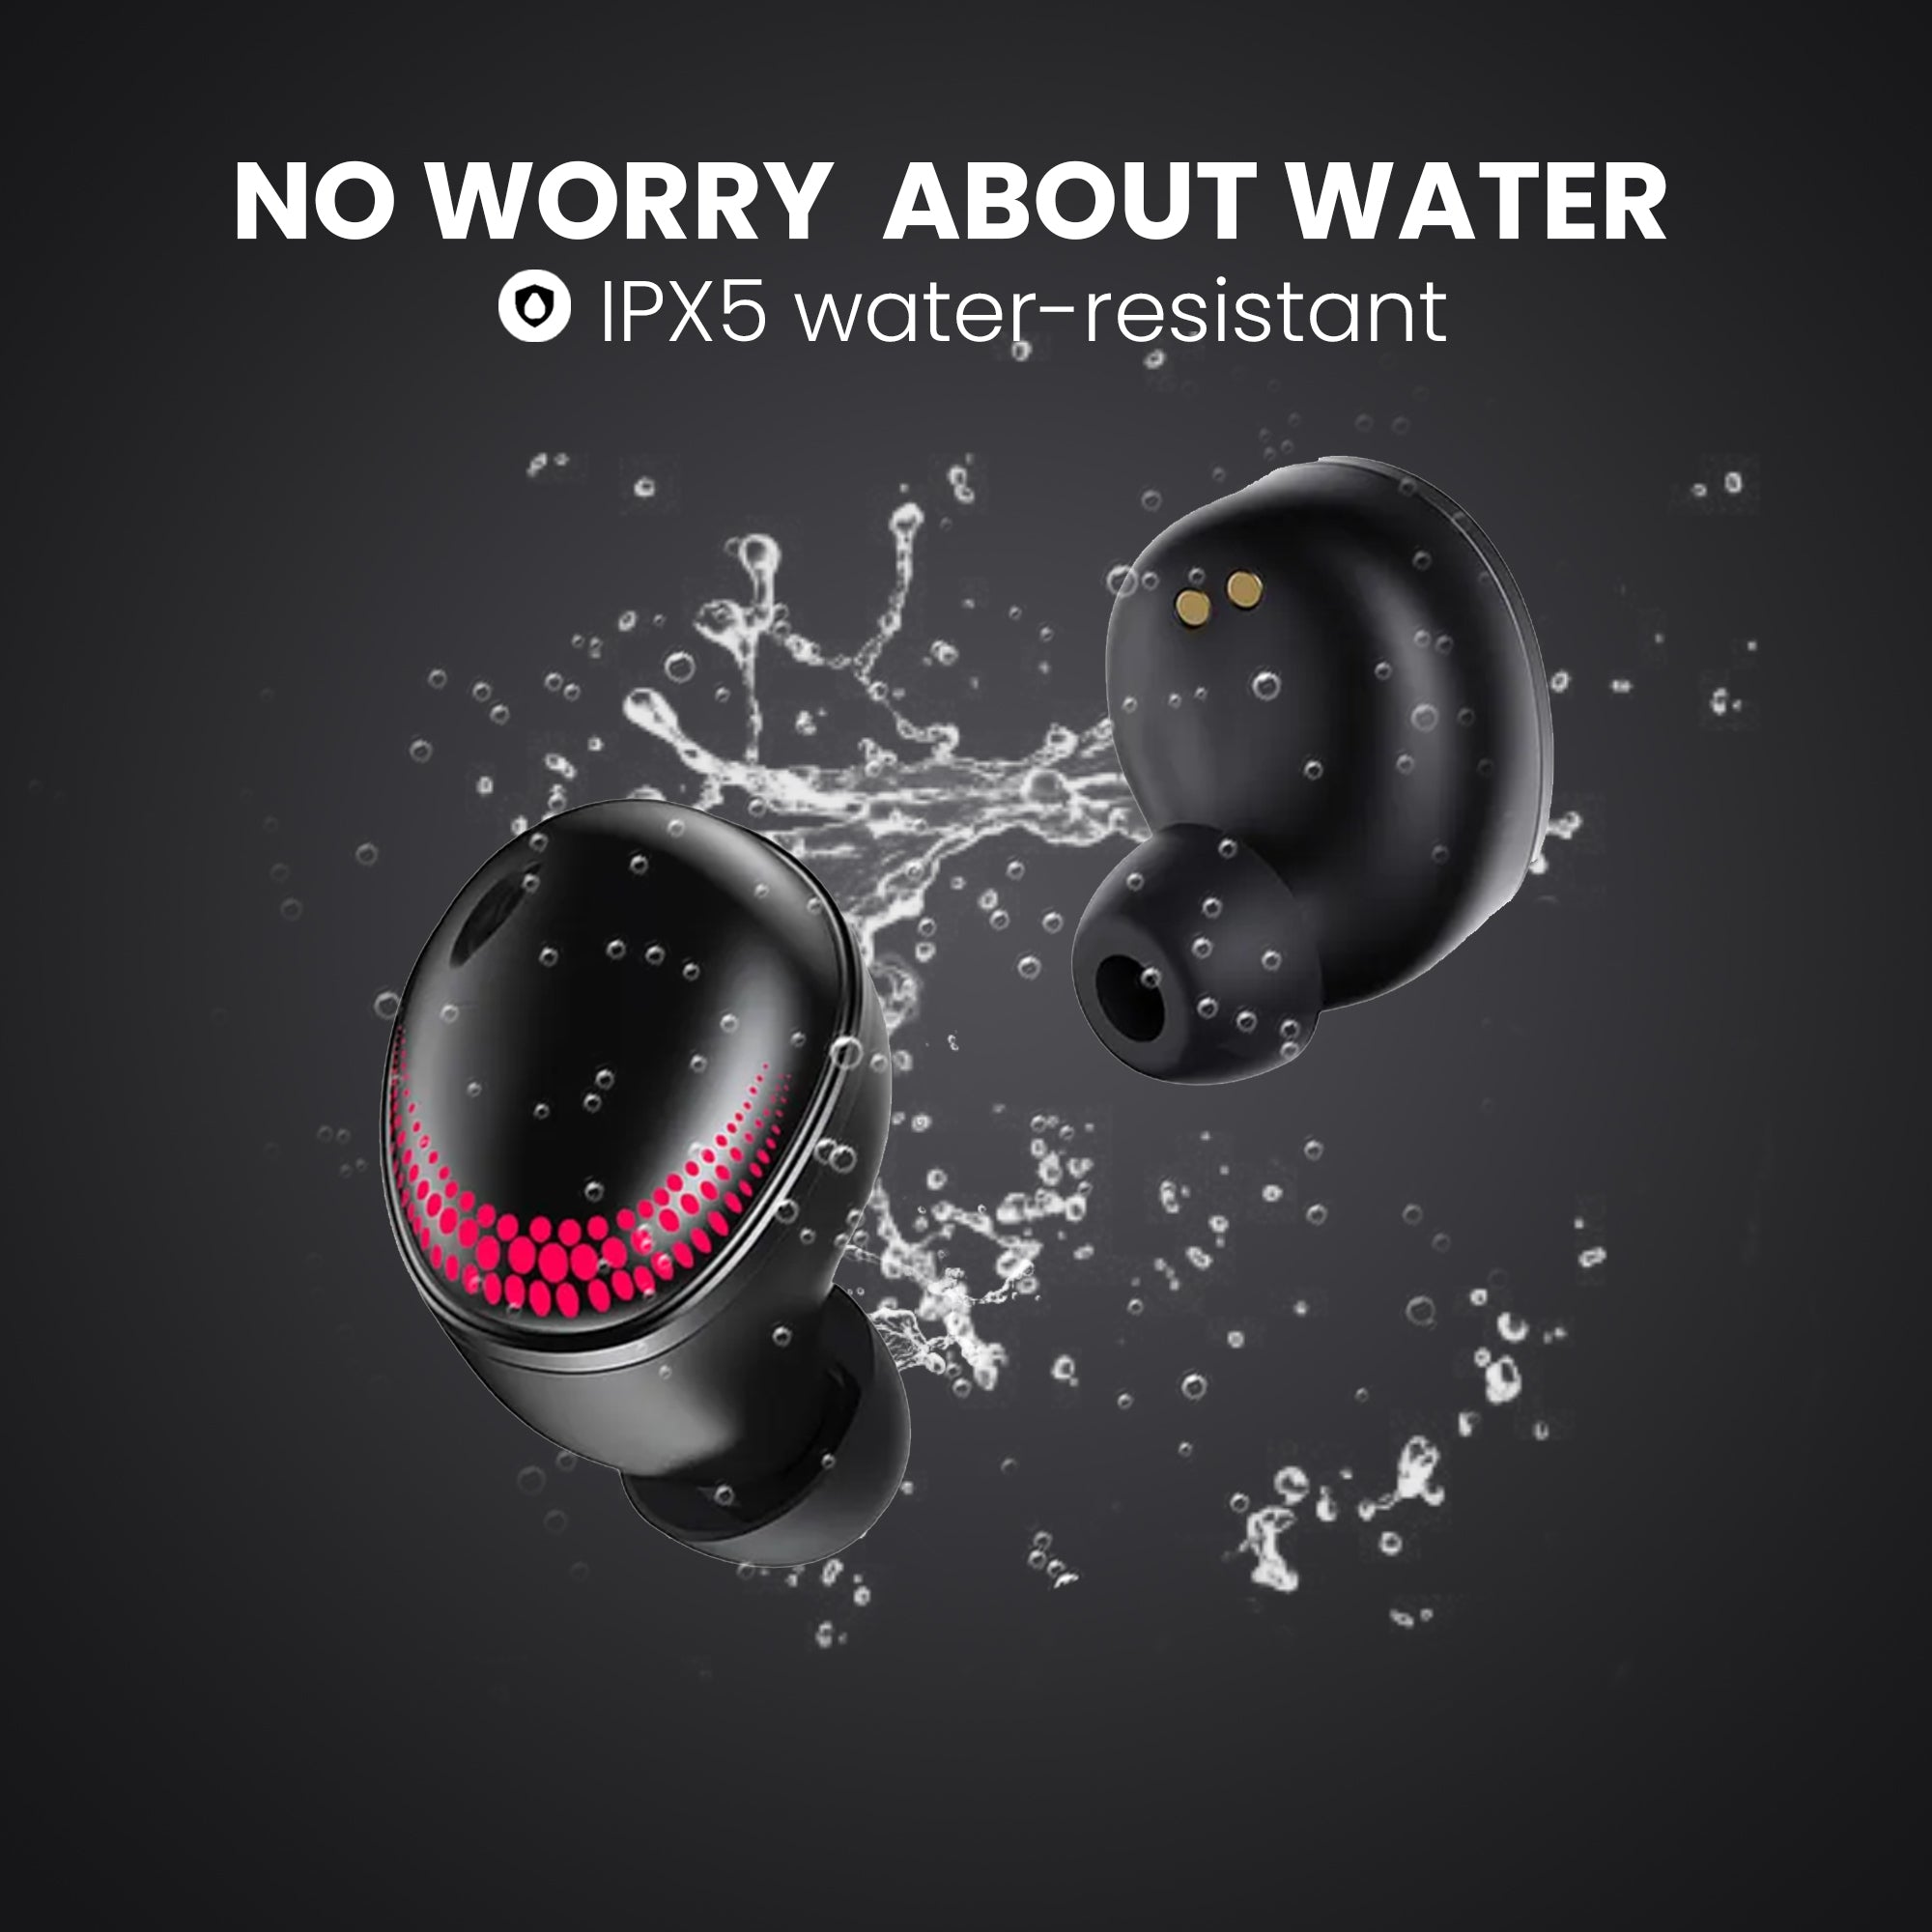 water resistant feature of BT 103